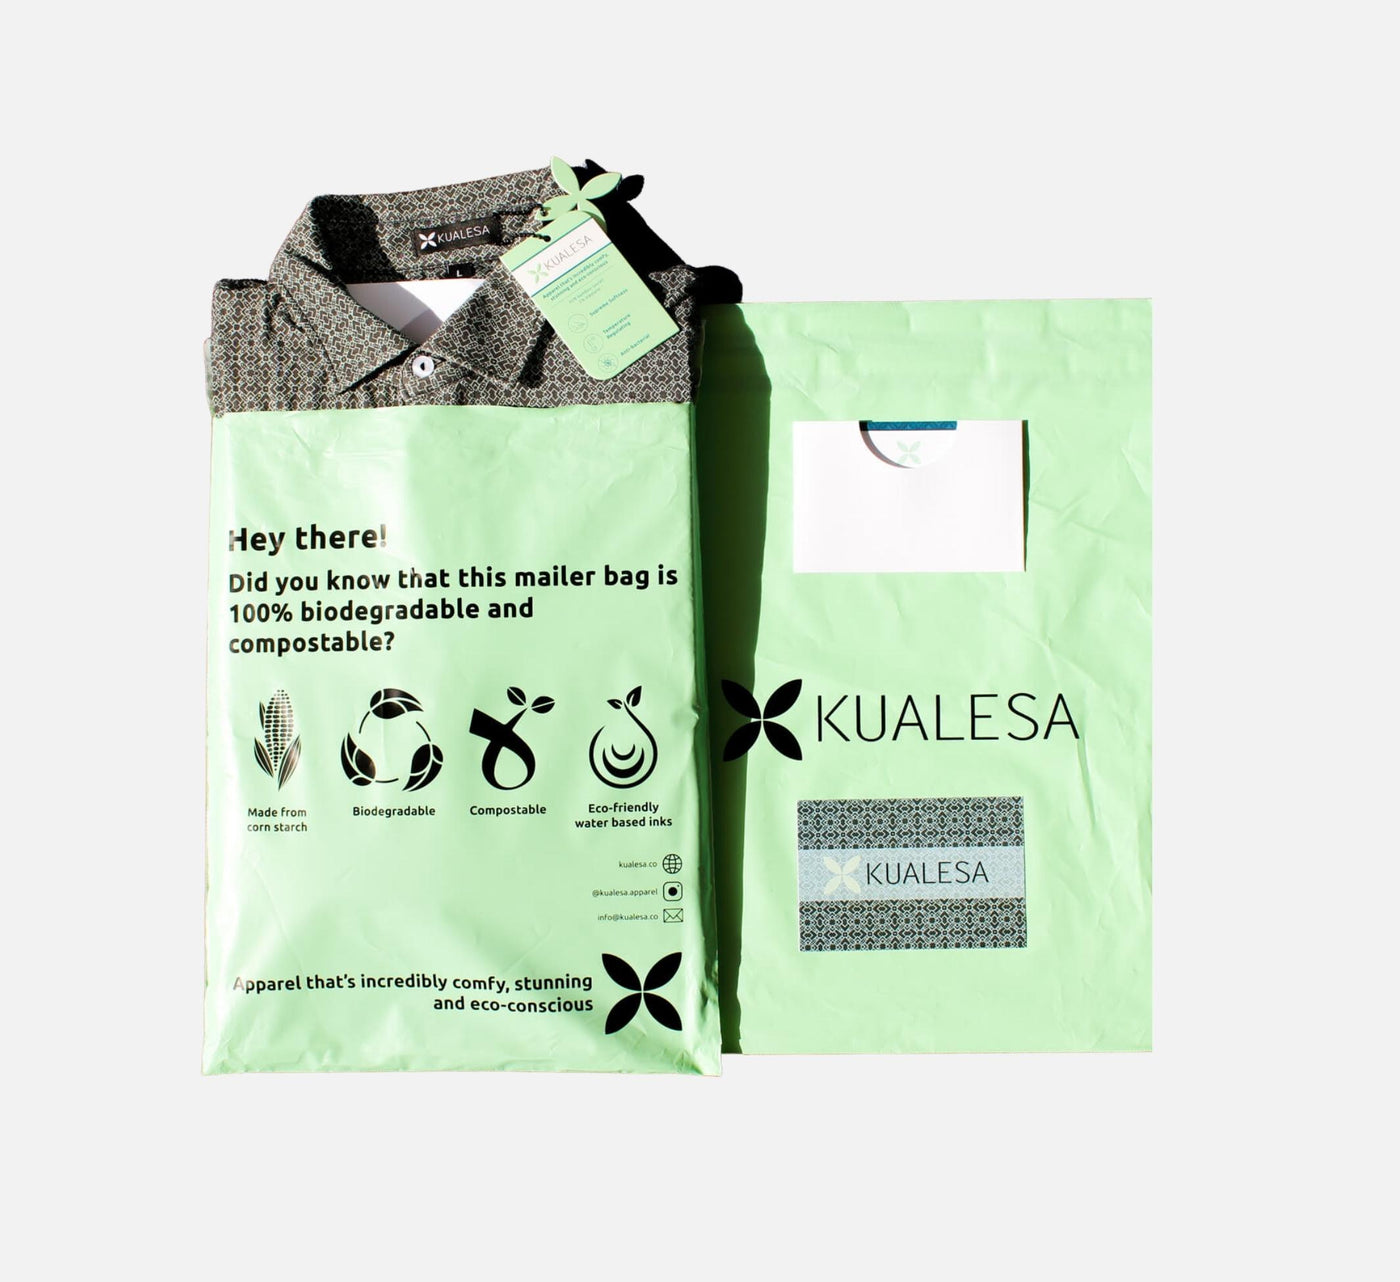 Eco-friendly mailer bag made from corn starch